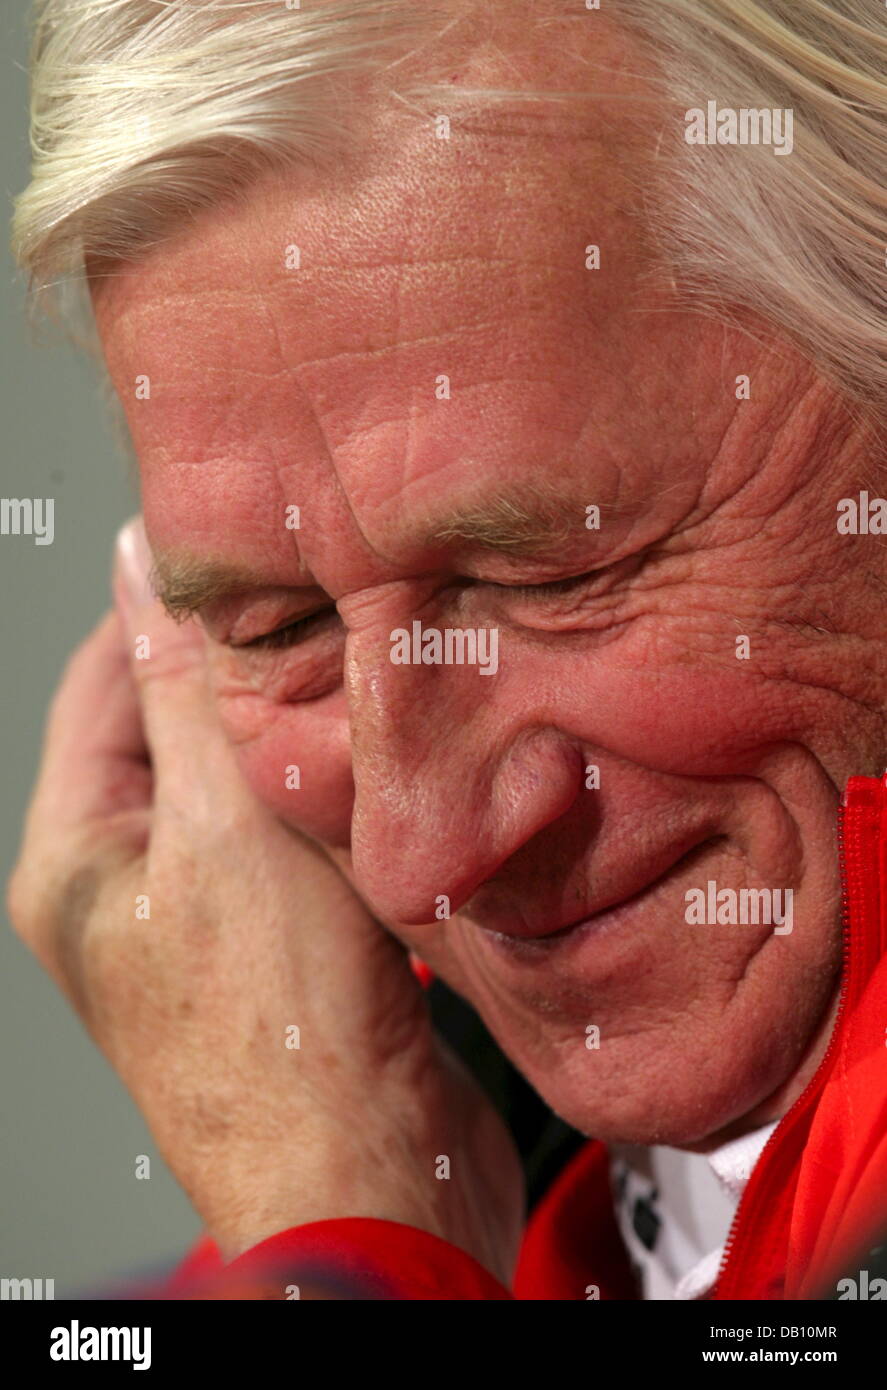 The head coach of the Czech national soccer team, Karel Brueckner, laughs during a press conference in Munich, Germany, 16 October 2007. The Czech team faces Germany in an Euro2008 qualifying match on 17 October in Munich. Photo: Peter Kneffel Stock Photo